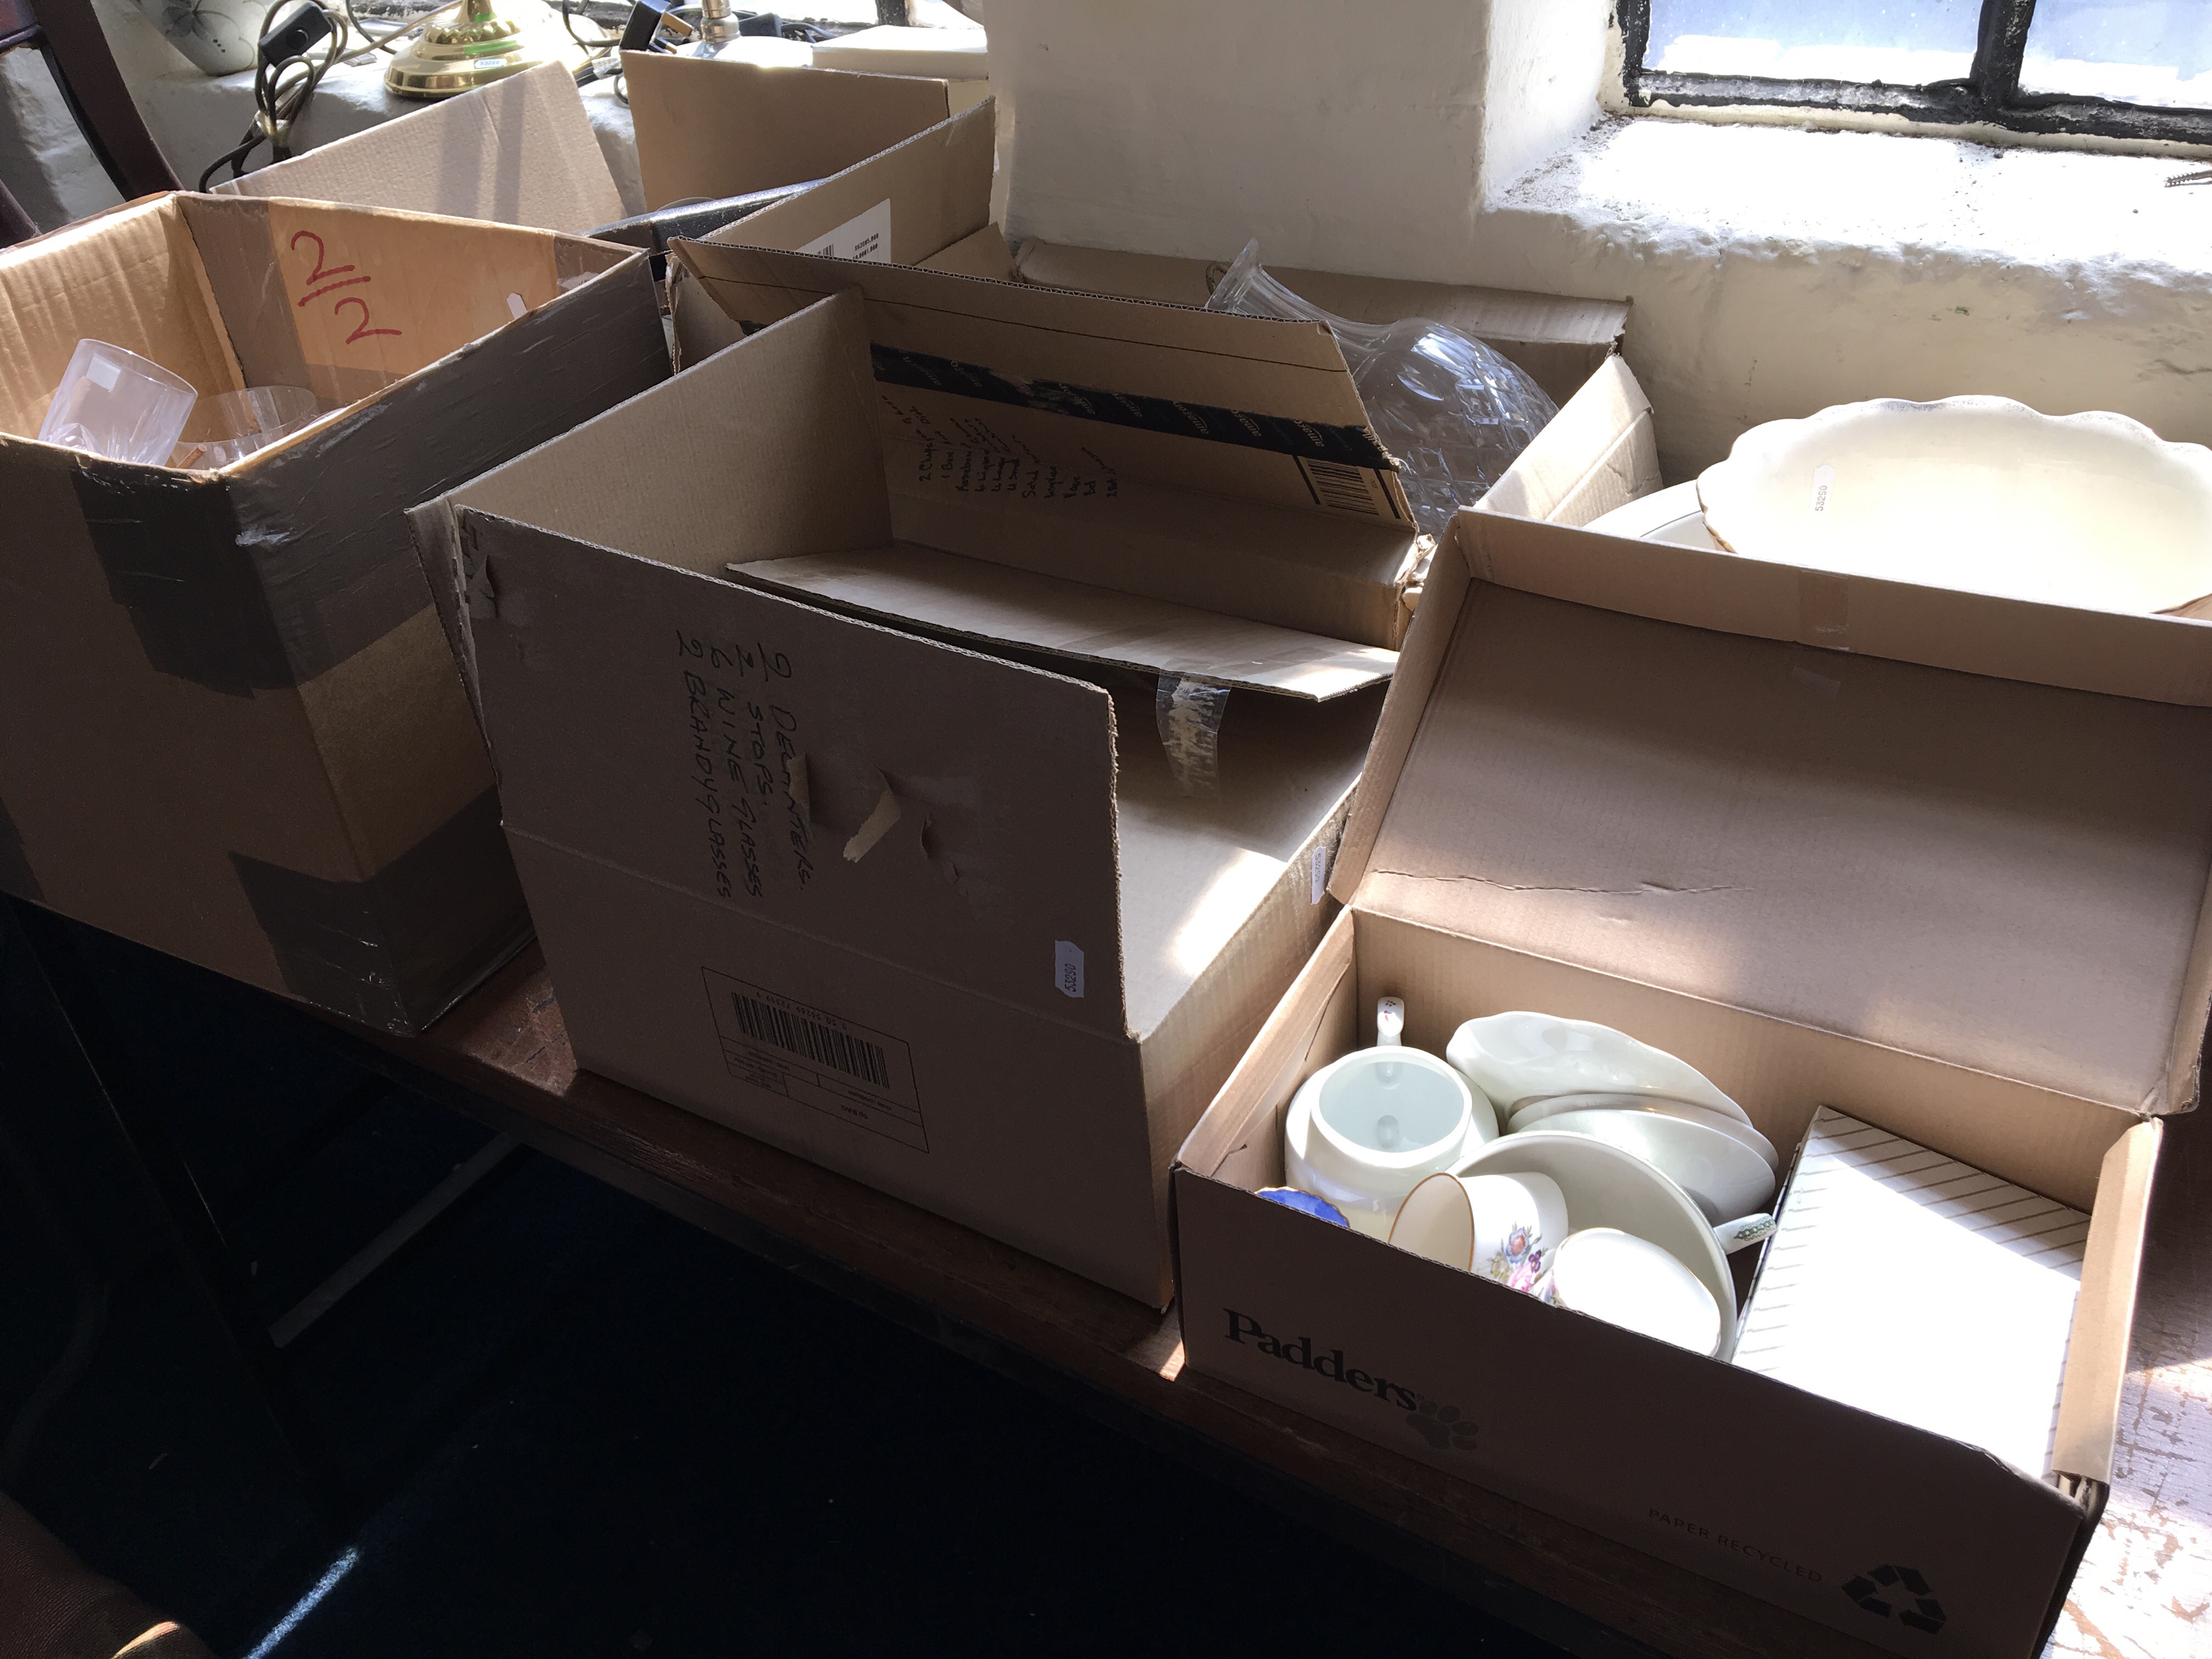 Five boxes of glassware, china, plated ware etc.